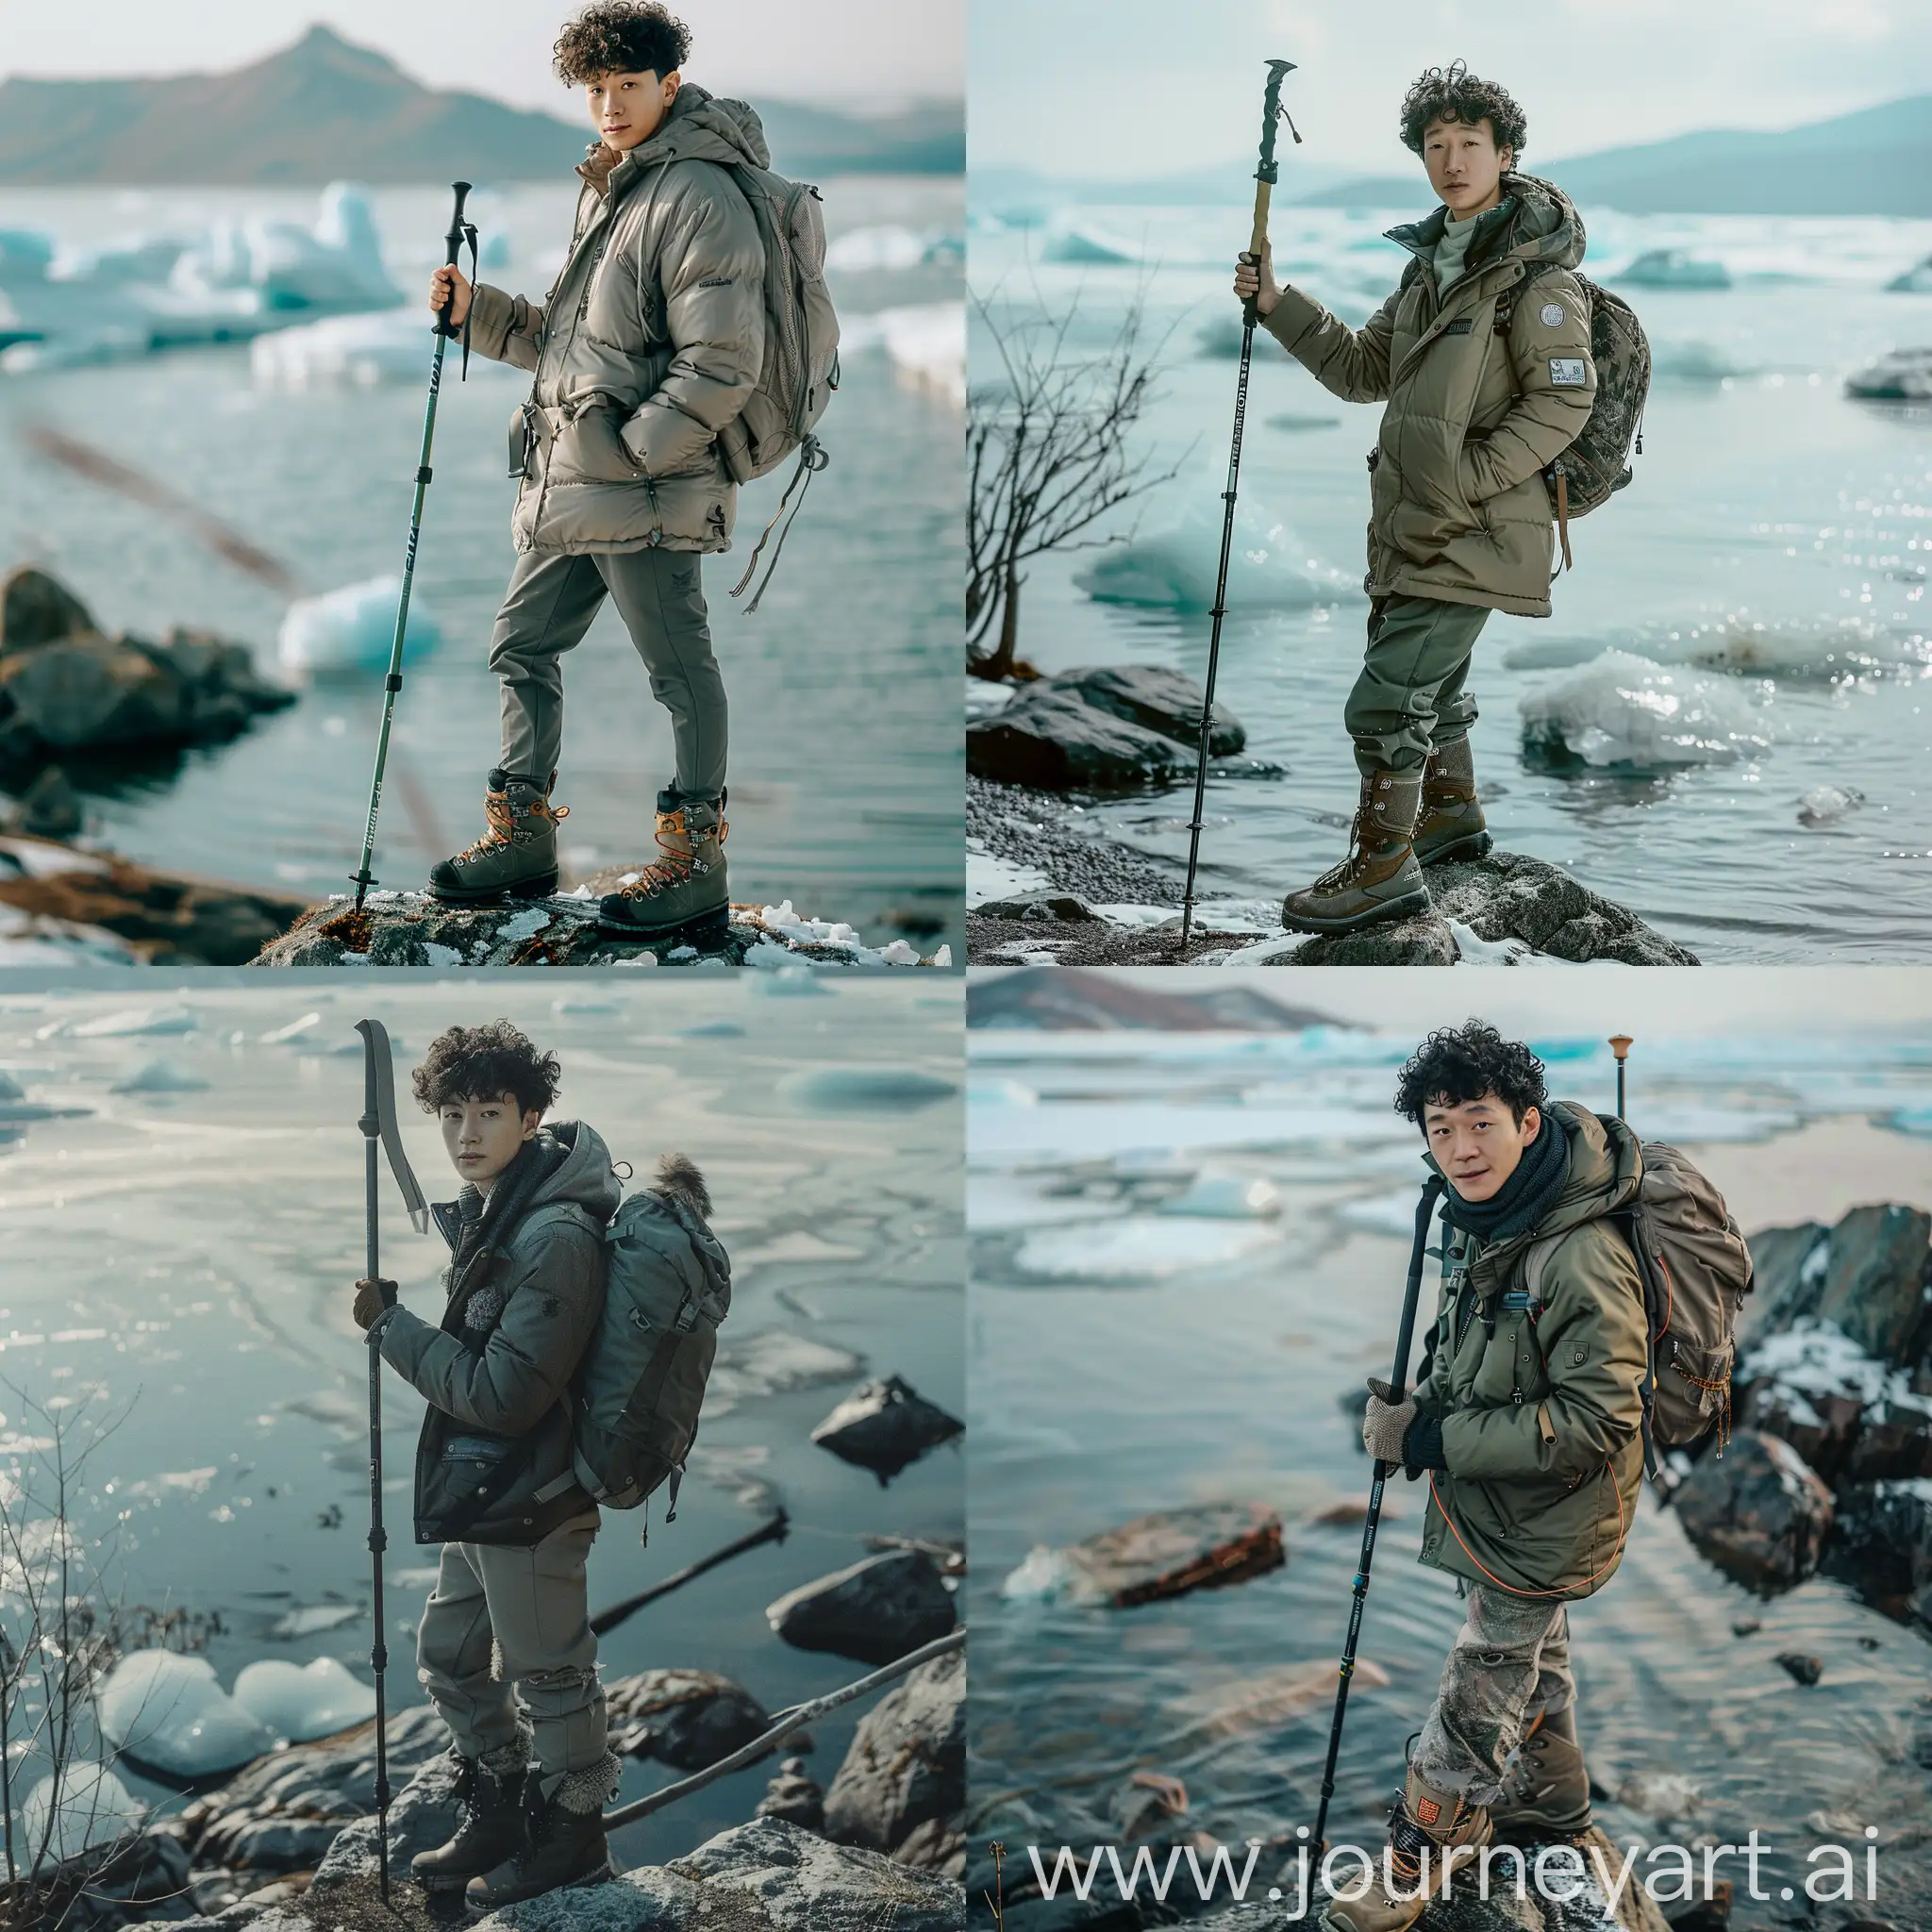 high angle camera, wide shoot photography, a Korean man with short curly hair, wearing a jacket and boots, standing while holding a trekking pole on a rock, standing on a lake, an ice lake in the Siberian region known as "Lake Baikal", calm atmosphere, bokeh background with views of icebergs visible in the distance, tampa pose, advertising shoot, looking at the camera